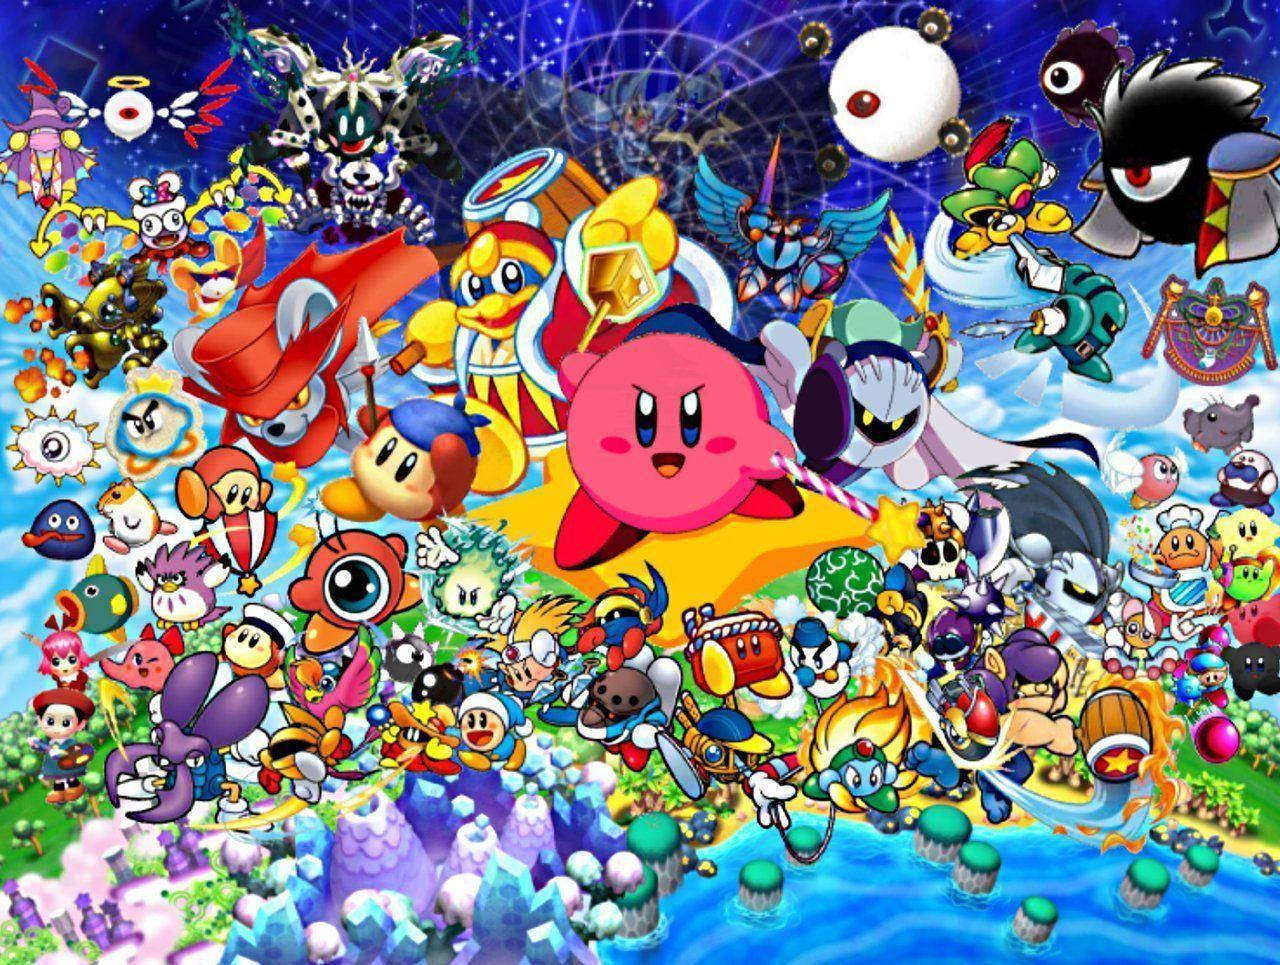 All The Fun Characters From The Popular Action-adventure Platform Video Game Kirby! Wallpaper